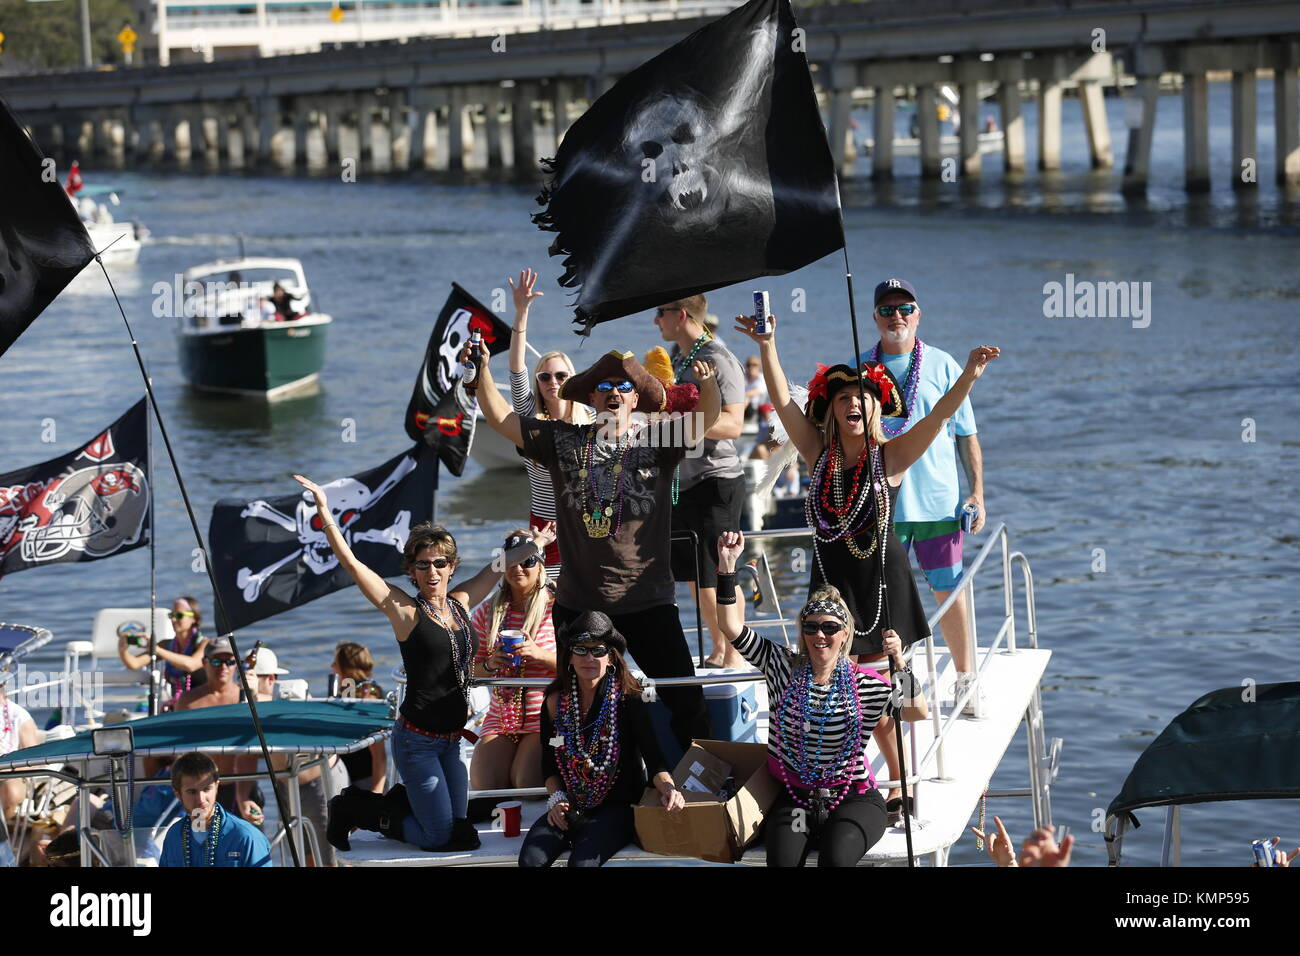 Boaters gather in Tampa Bay along Bayshore boulevard during Tampa's Gasparilla Pirate Invasion and Parade. Stock Photo